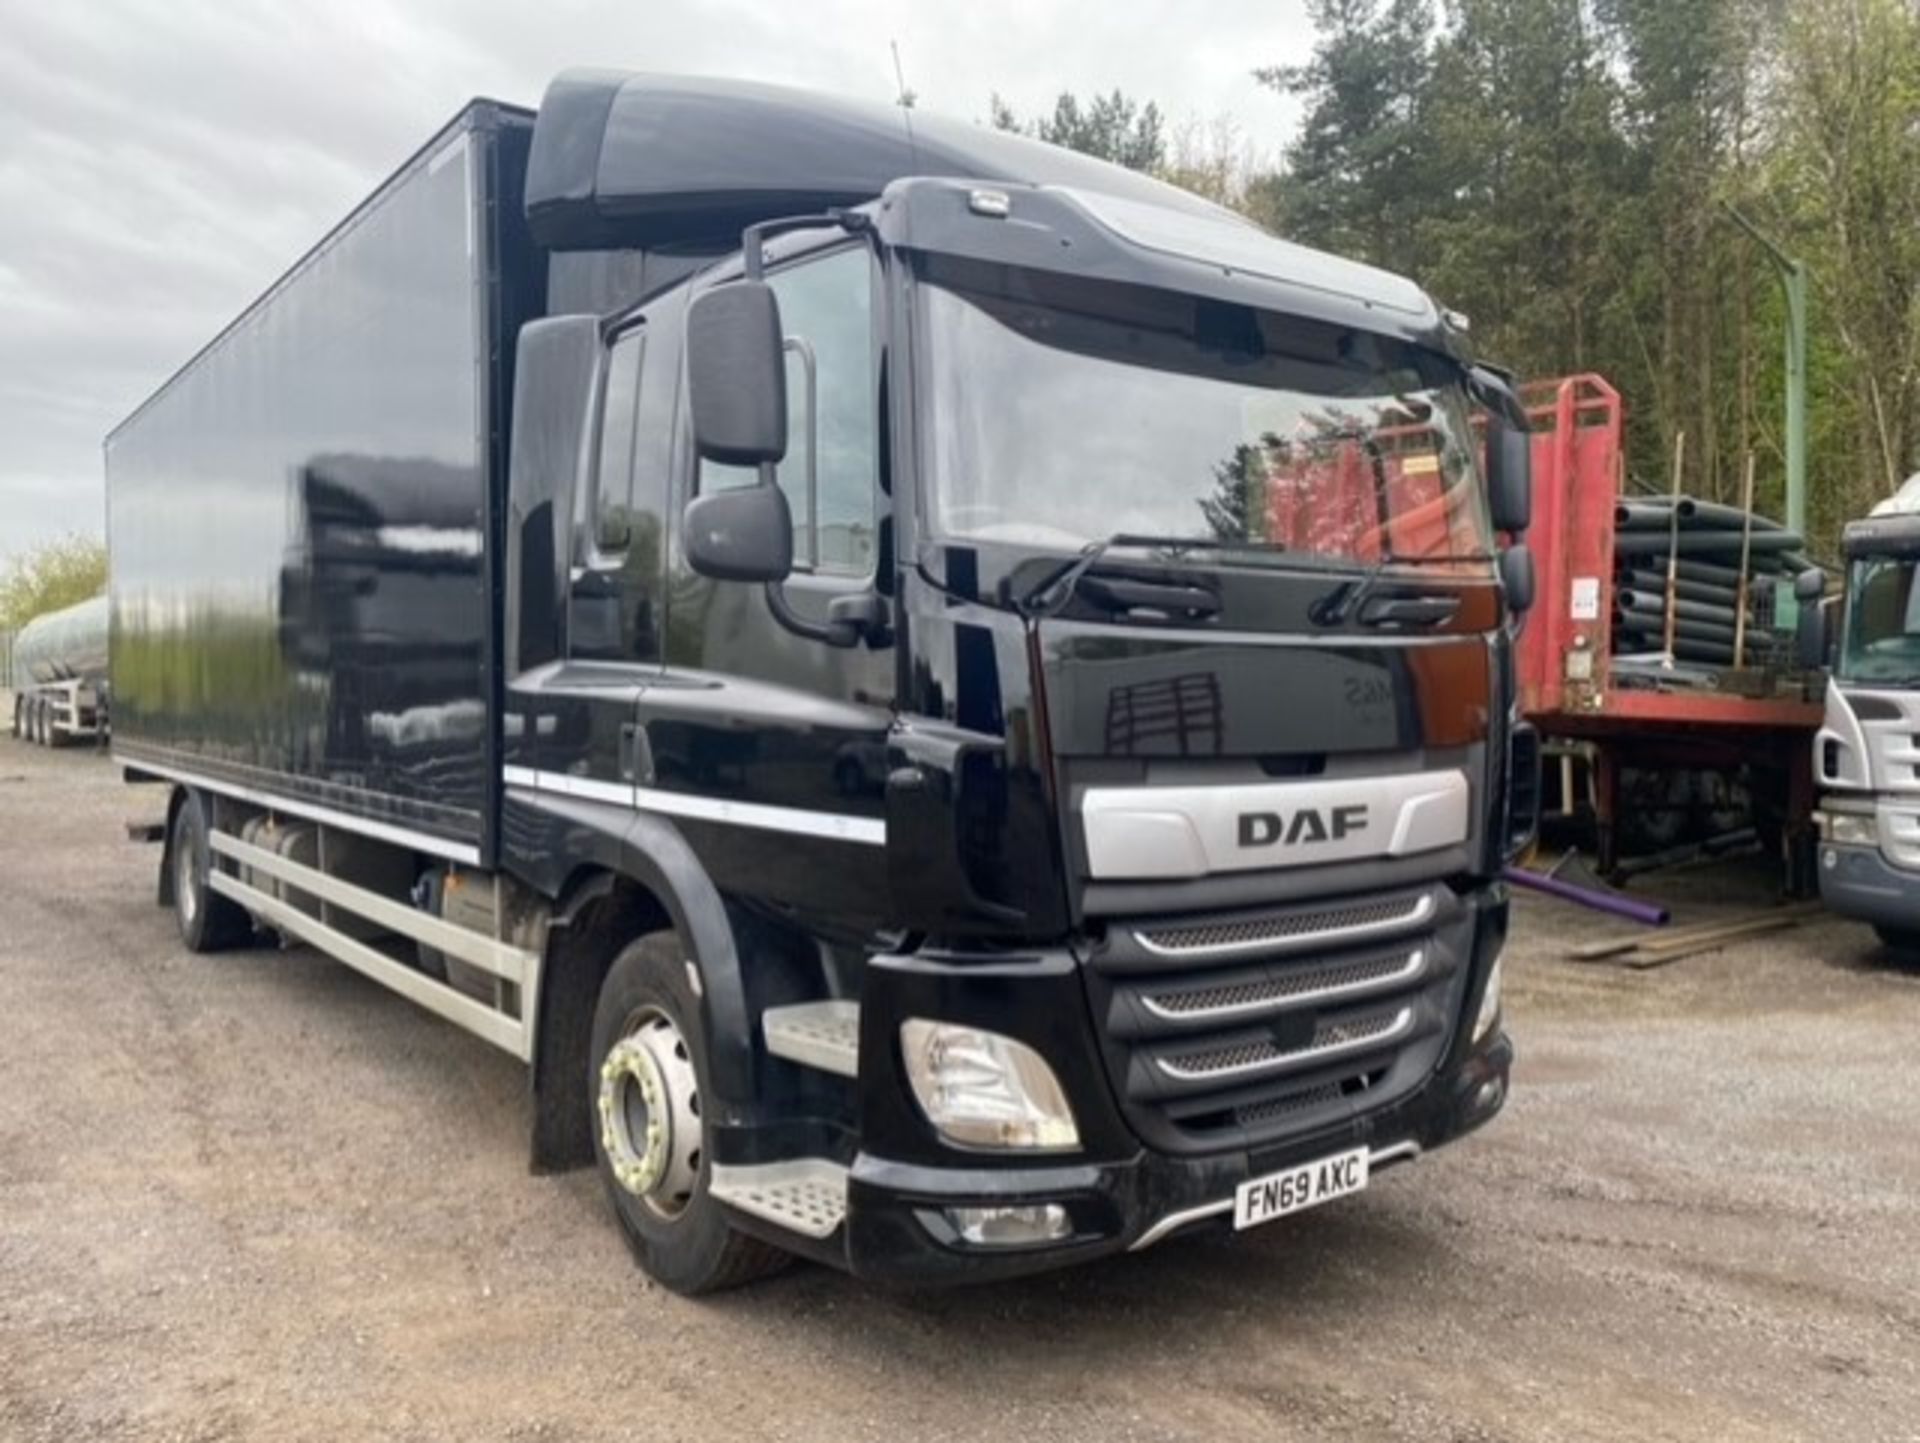 2019, DAF CF 260 FA - FN69 AXC (18 Ton Rigid Truck with Tail Lift) - Image 2 of 17